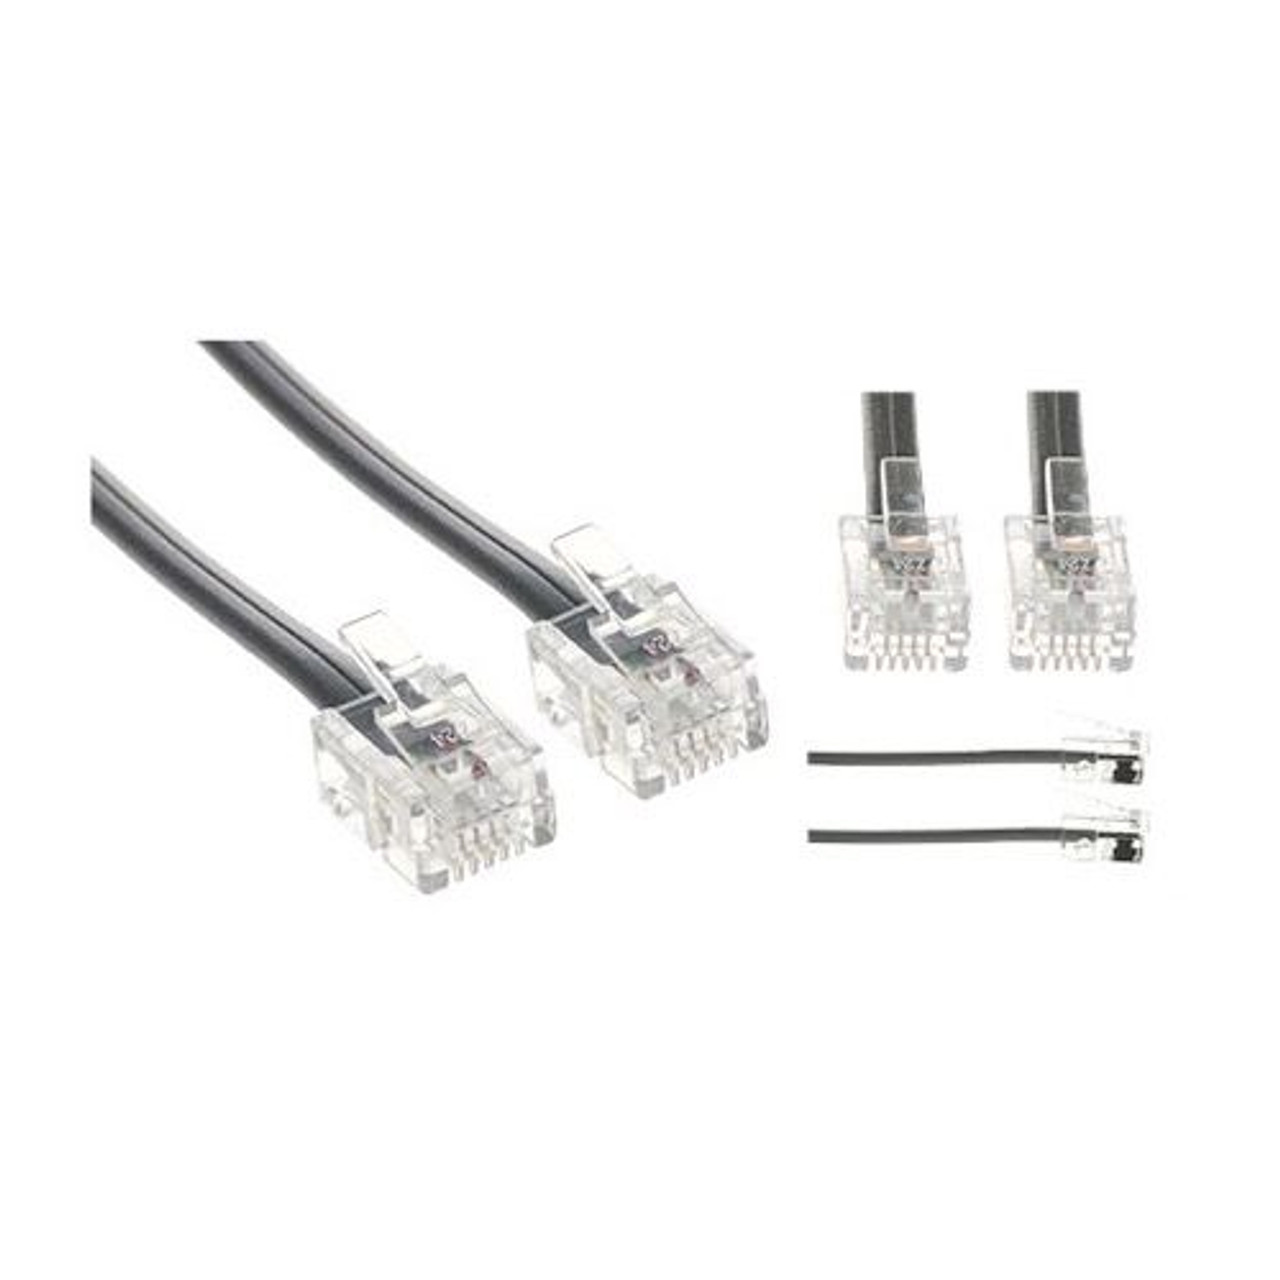 Eagle 15' FT Data Cable Cord Flat 4 Conductor Silver Satin 28 AWG RJ11 6P4C Processing Wire RJ11 6P4C Plug Jack Connect Silver Satin Gray Data Communication Extension Cable